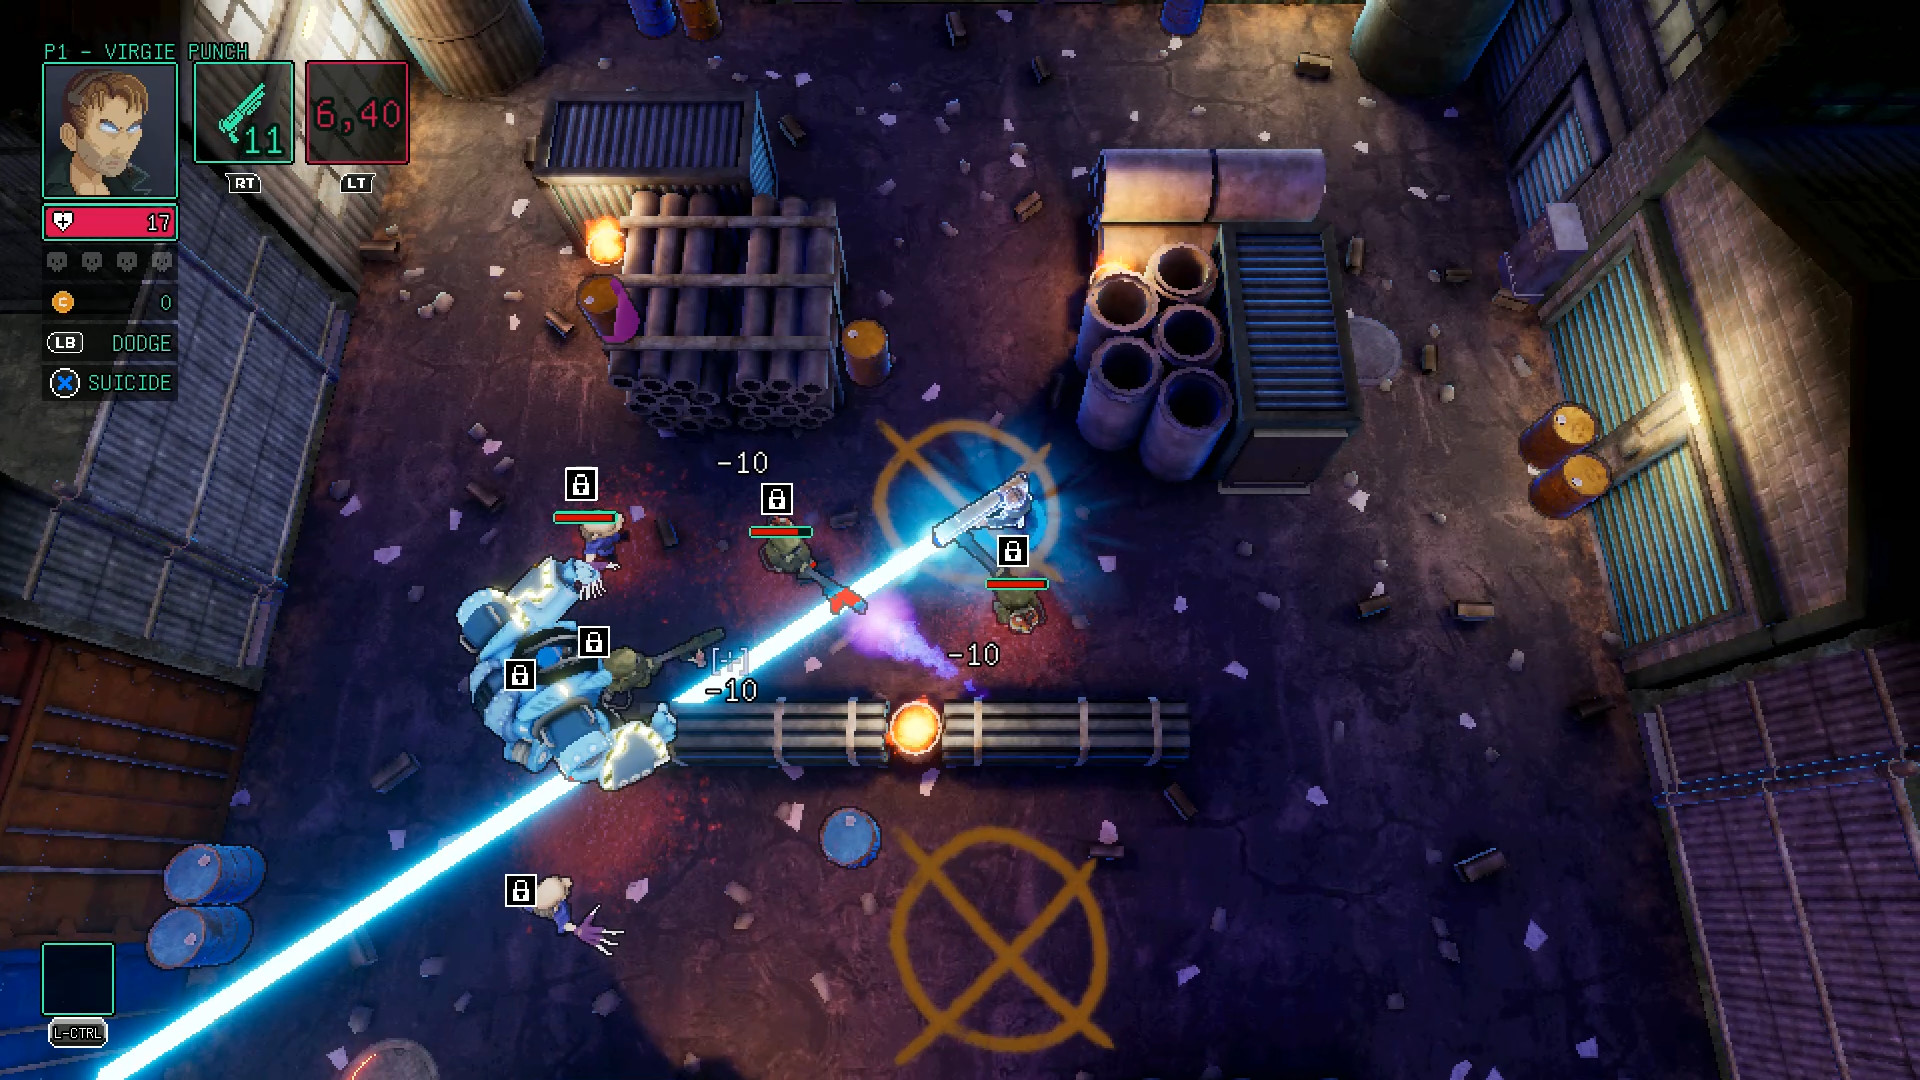 Twin-Stick Roguelite “HyperParasite” Launches April 3 on Steam Early Access